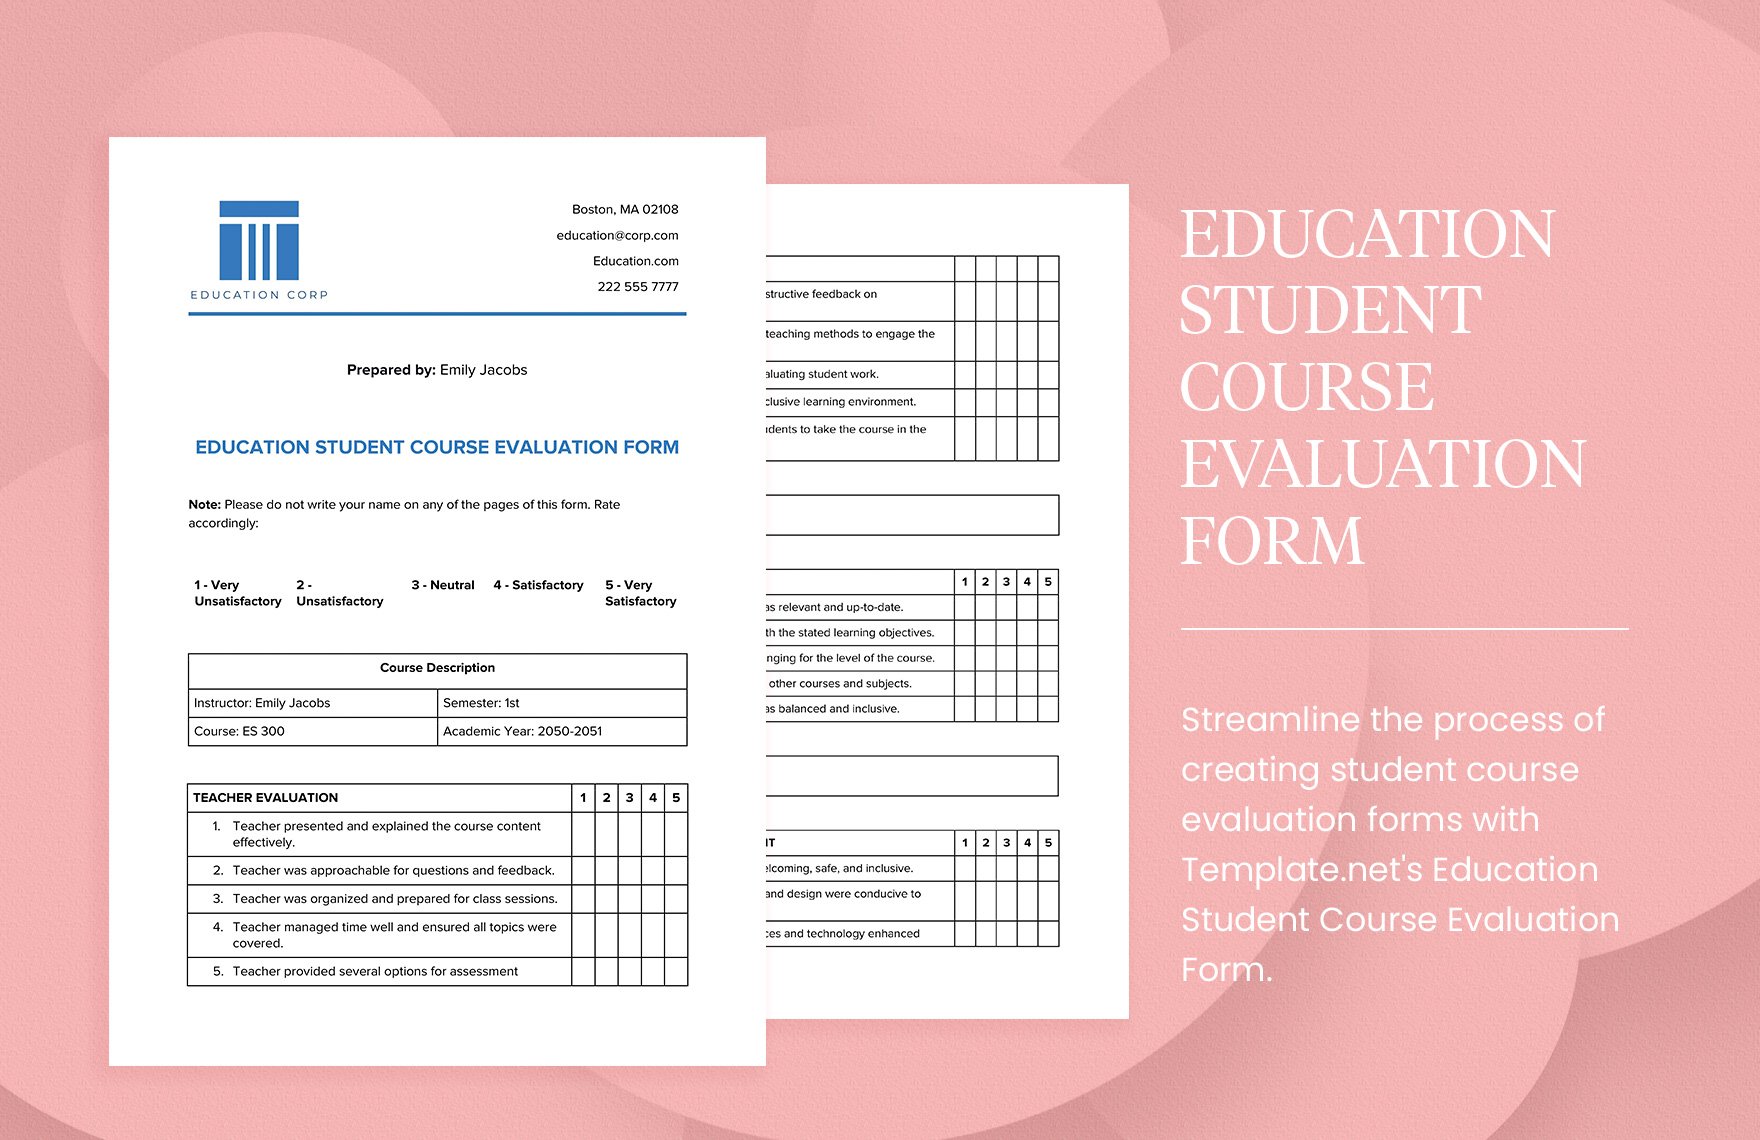 Education Student Course Evaluation Form in Word, Google Docs